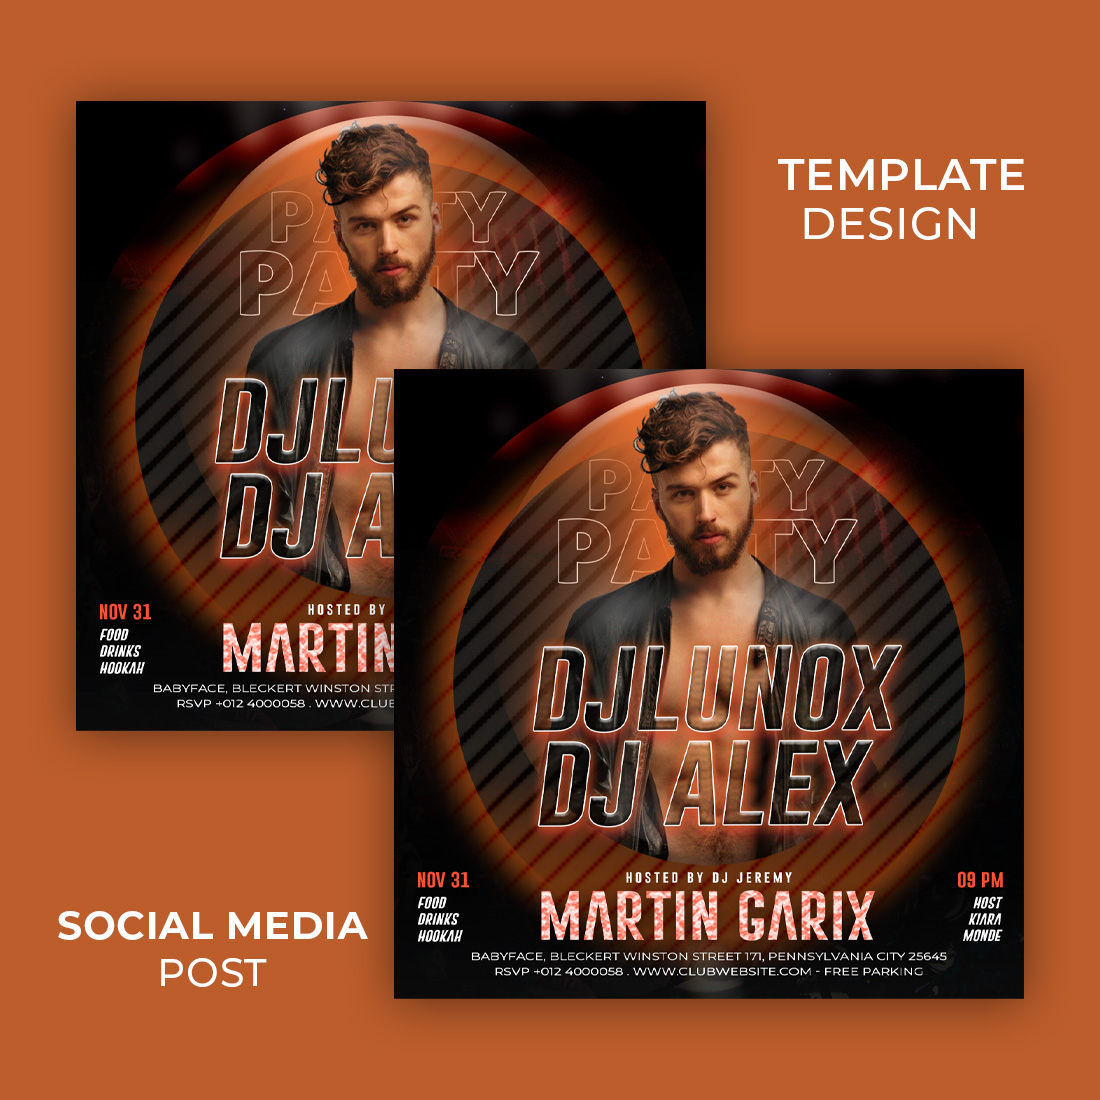 Dj party flyer soical media post and banner design template cover image.